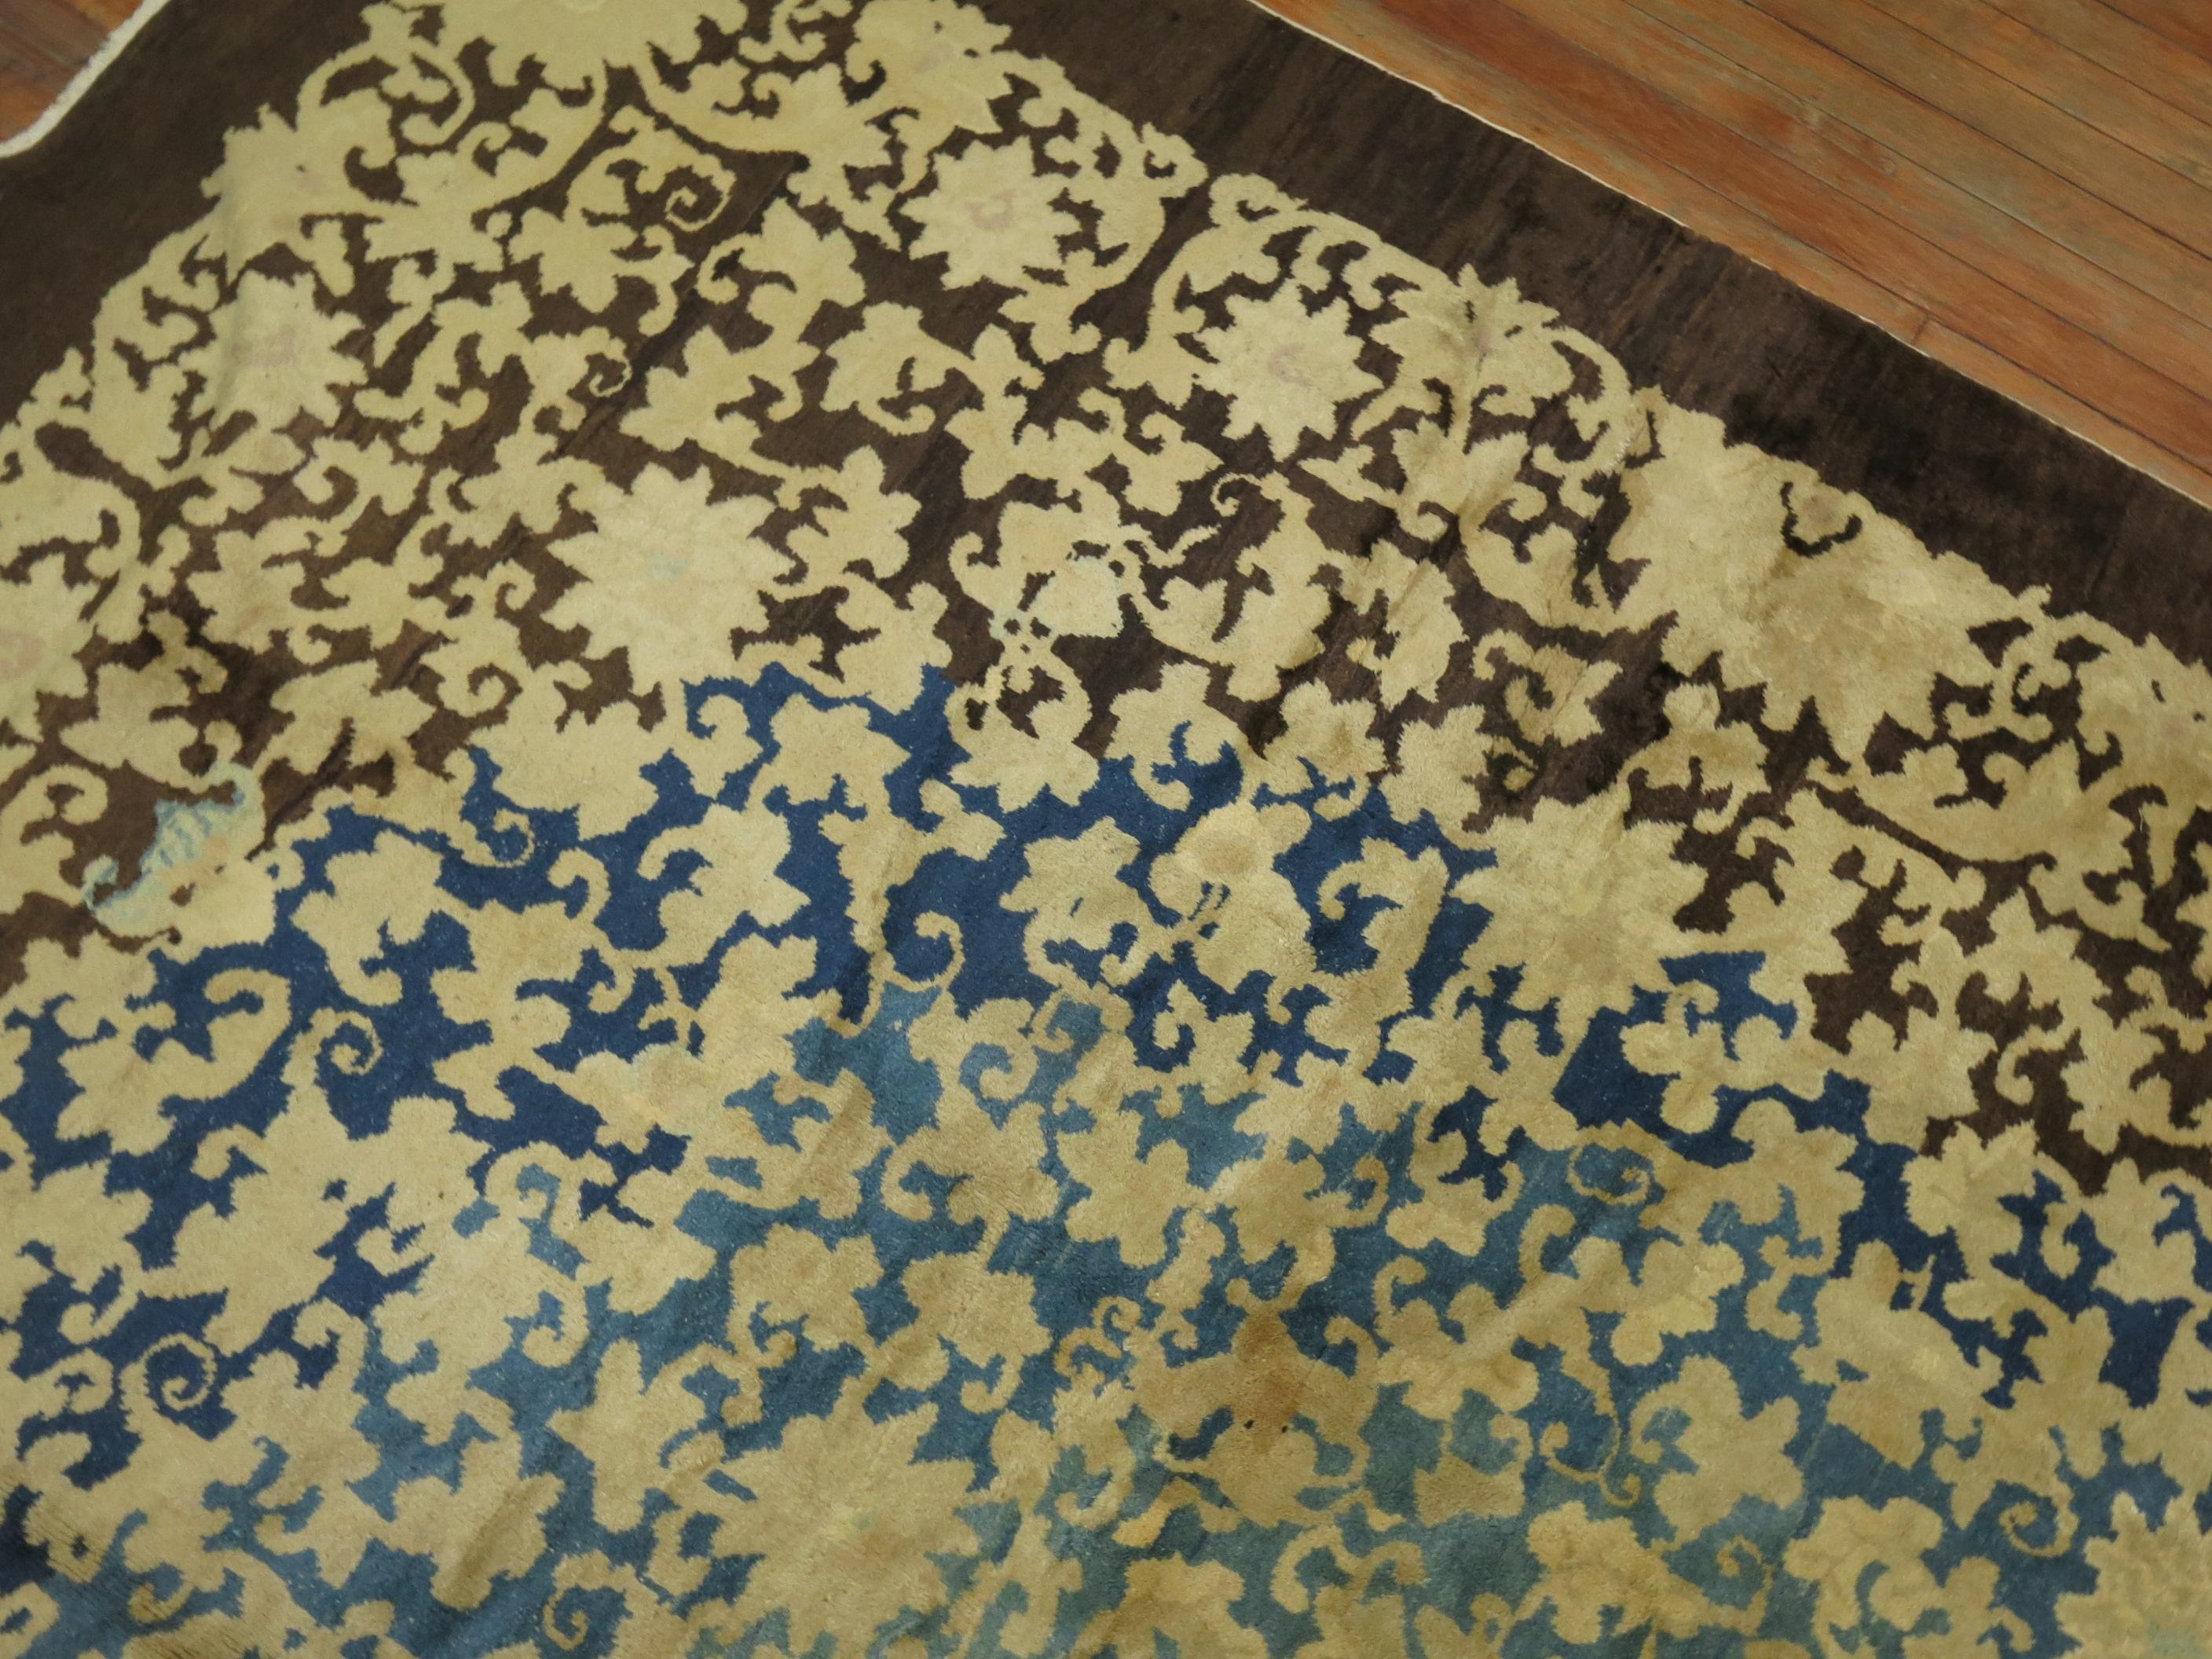 Zabihi Collection Floral Antique Chinee Rug im Zustand „Gut“ im Angebot in New York, NY